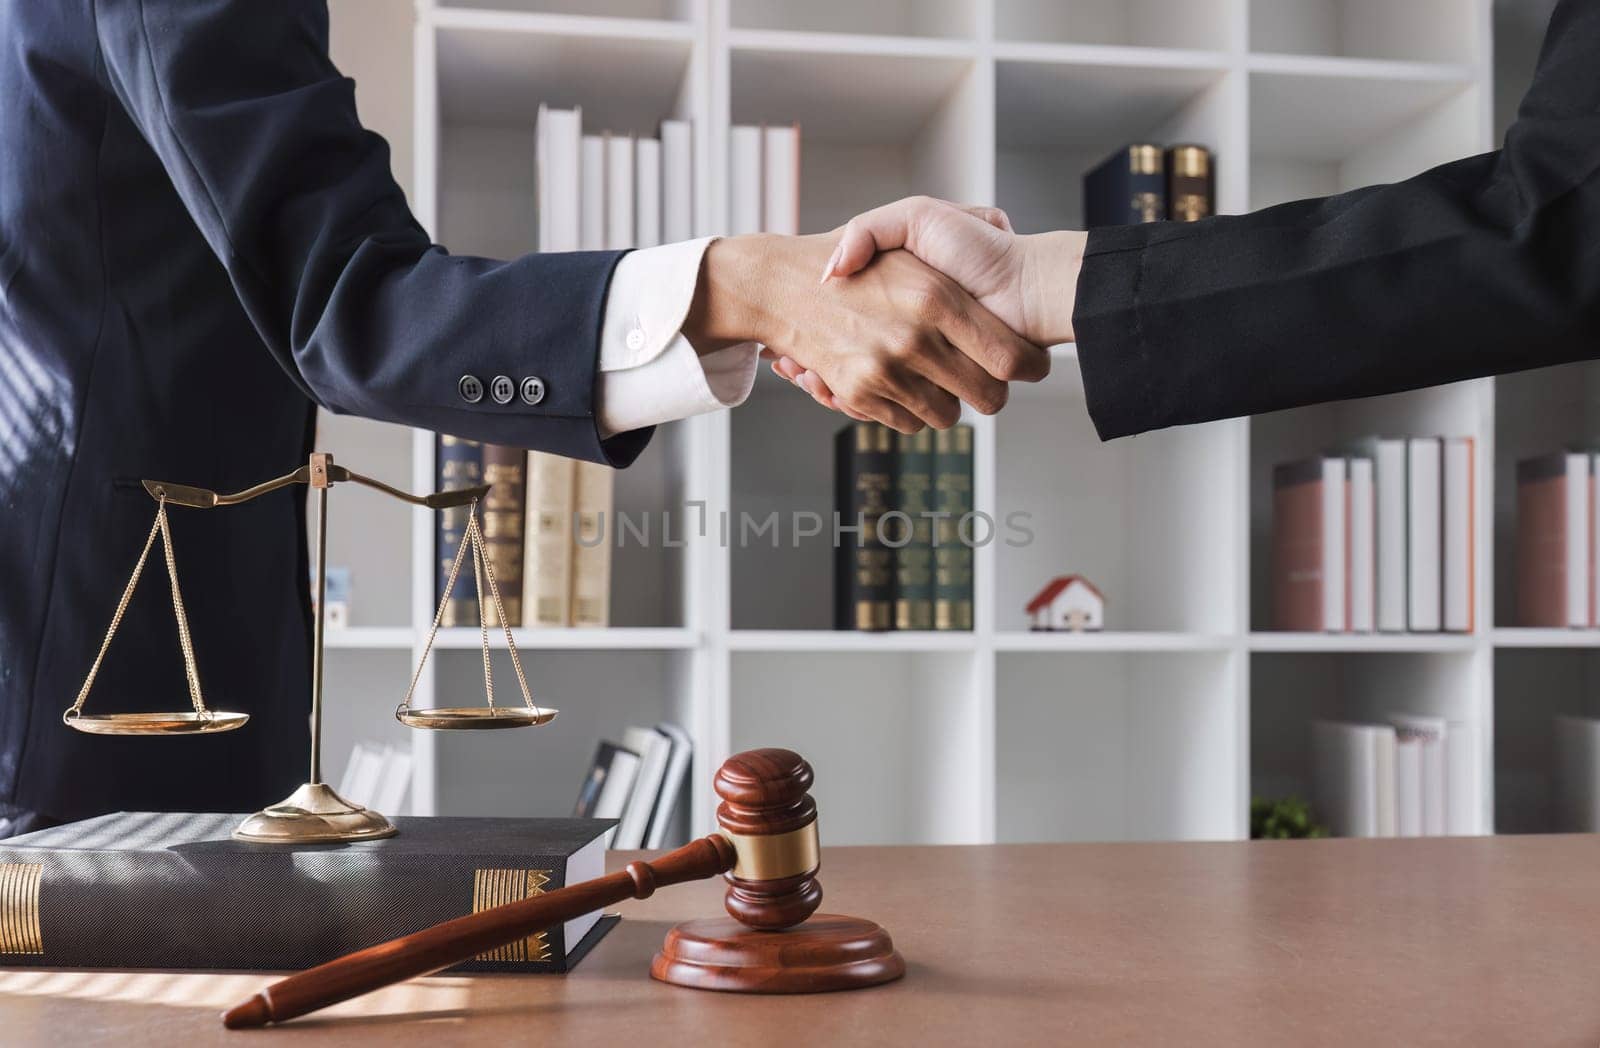 legal advice A lawyer shakes hands with a client after a successful consultation. by wichayada